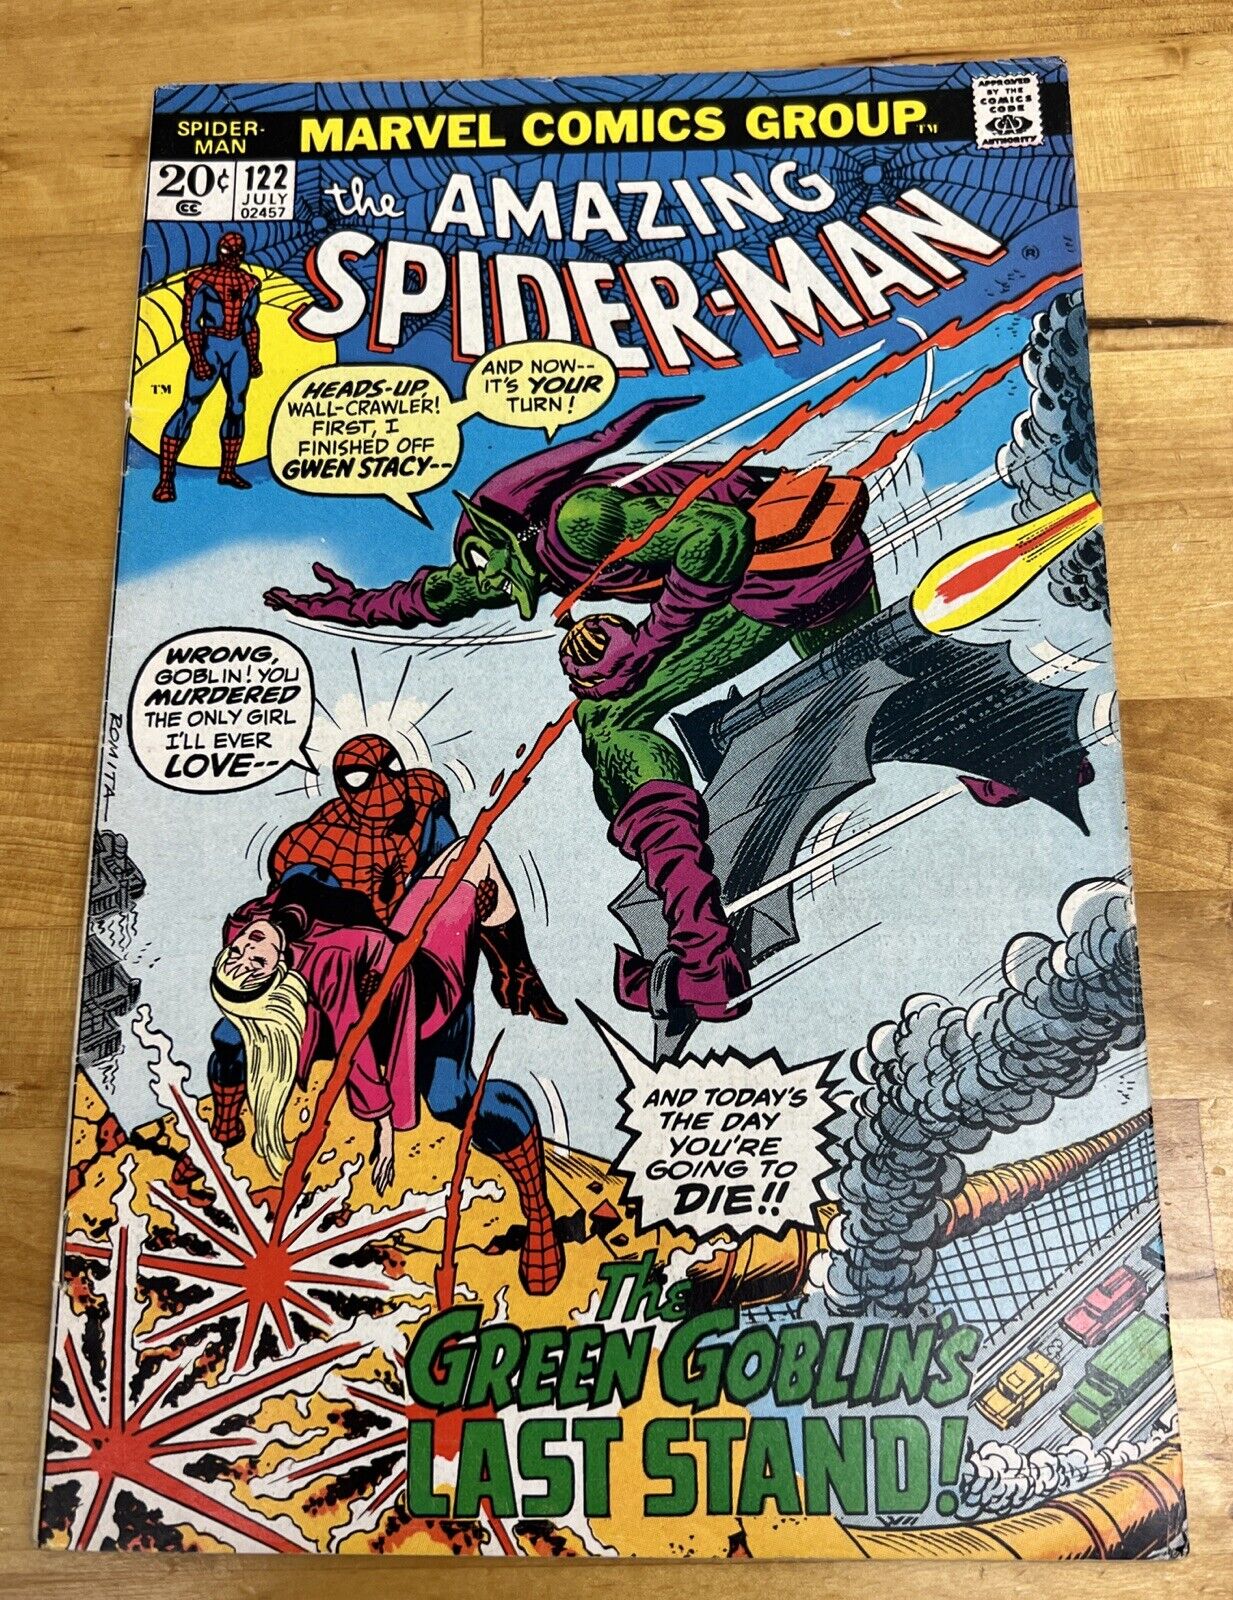 The Amazing Spider-Man #122  - Death of the Green Goblin Marvel